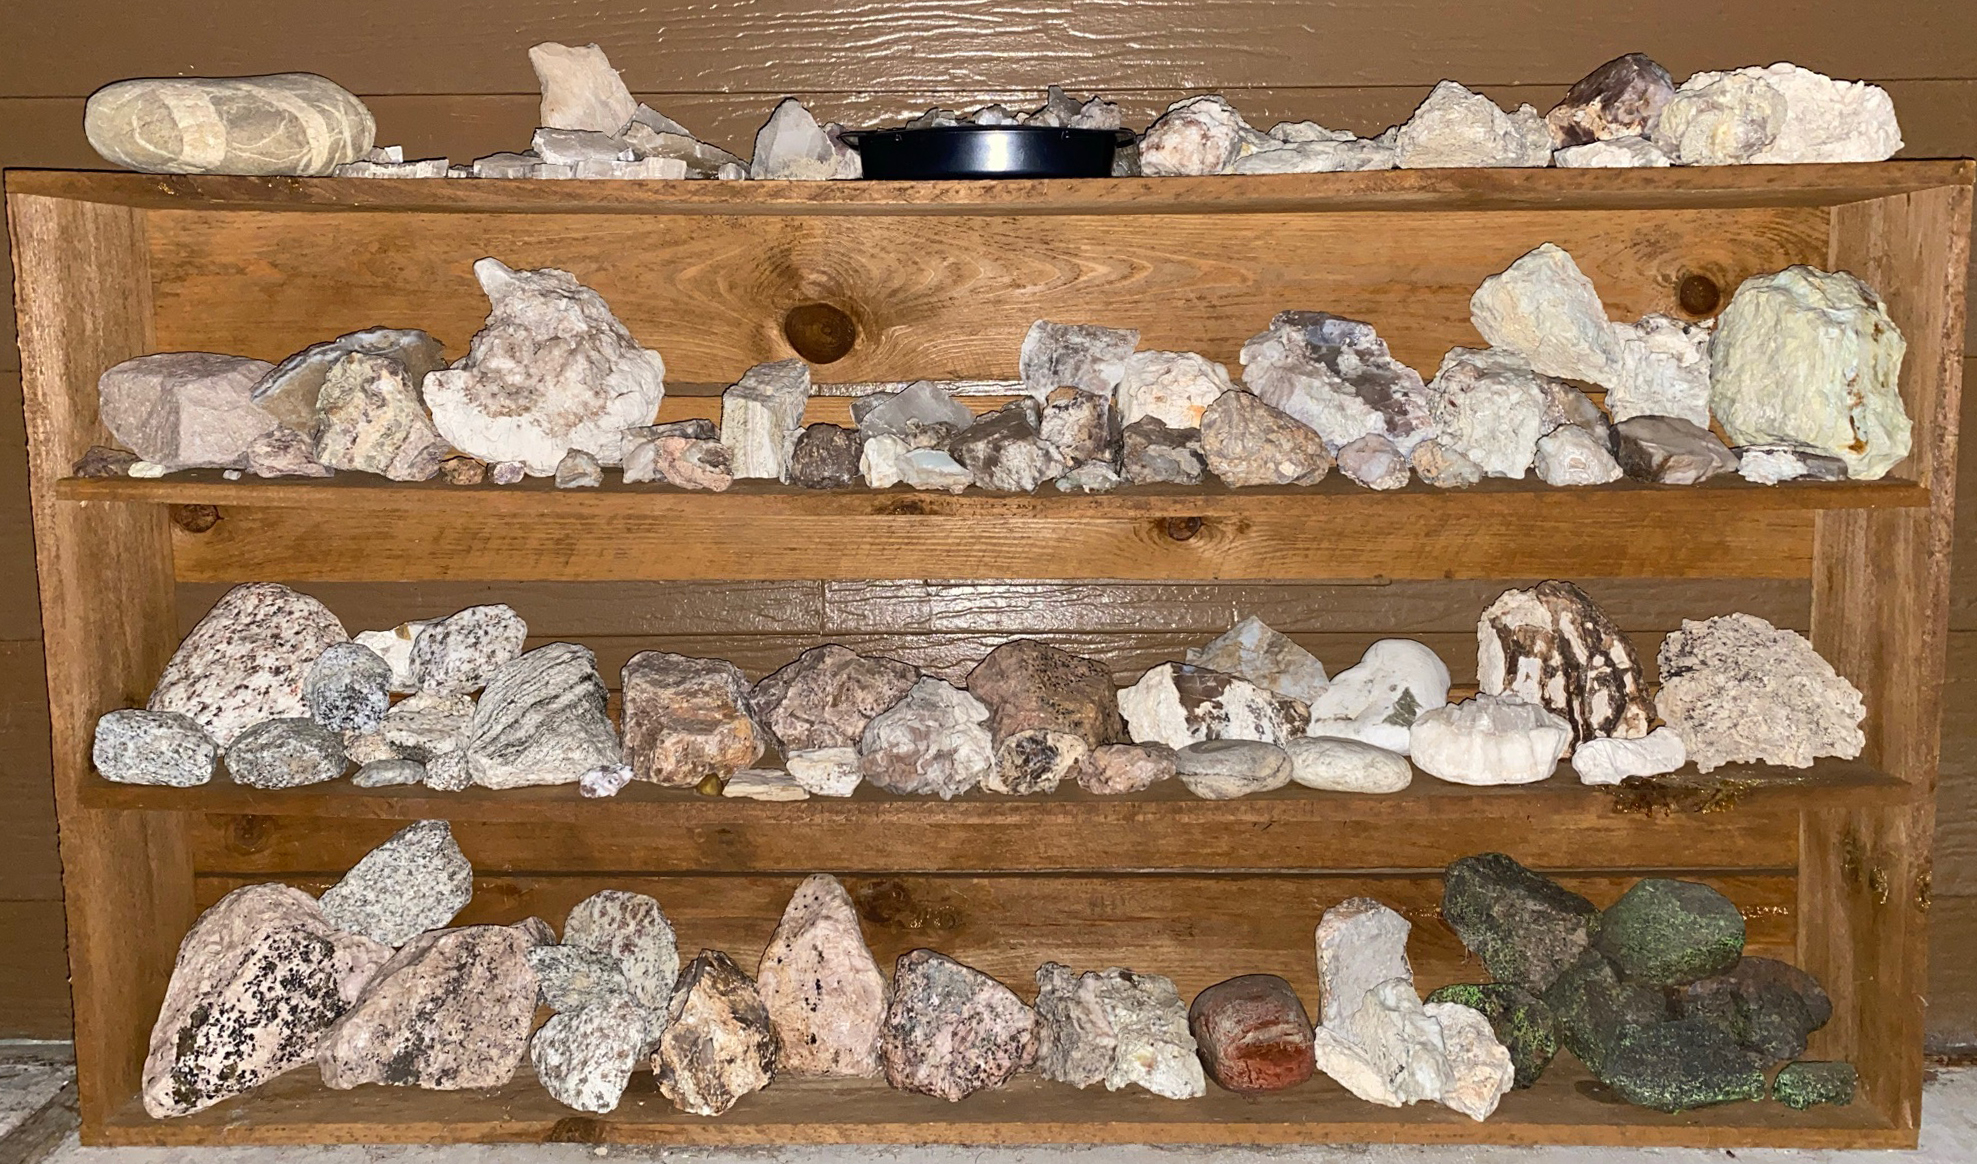 4 shelves of mostly white to light-colored rocks under white xenon flash light (same as shown in fluorecent mineral images).